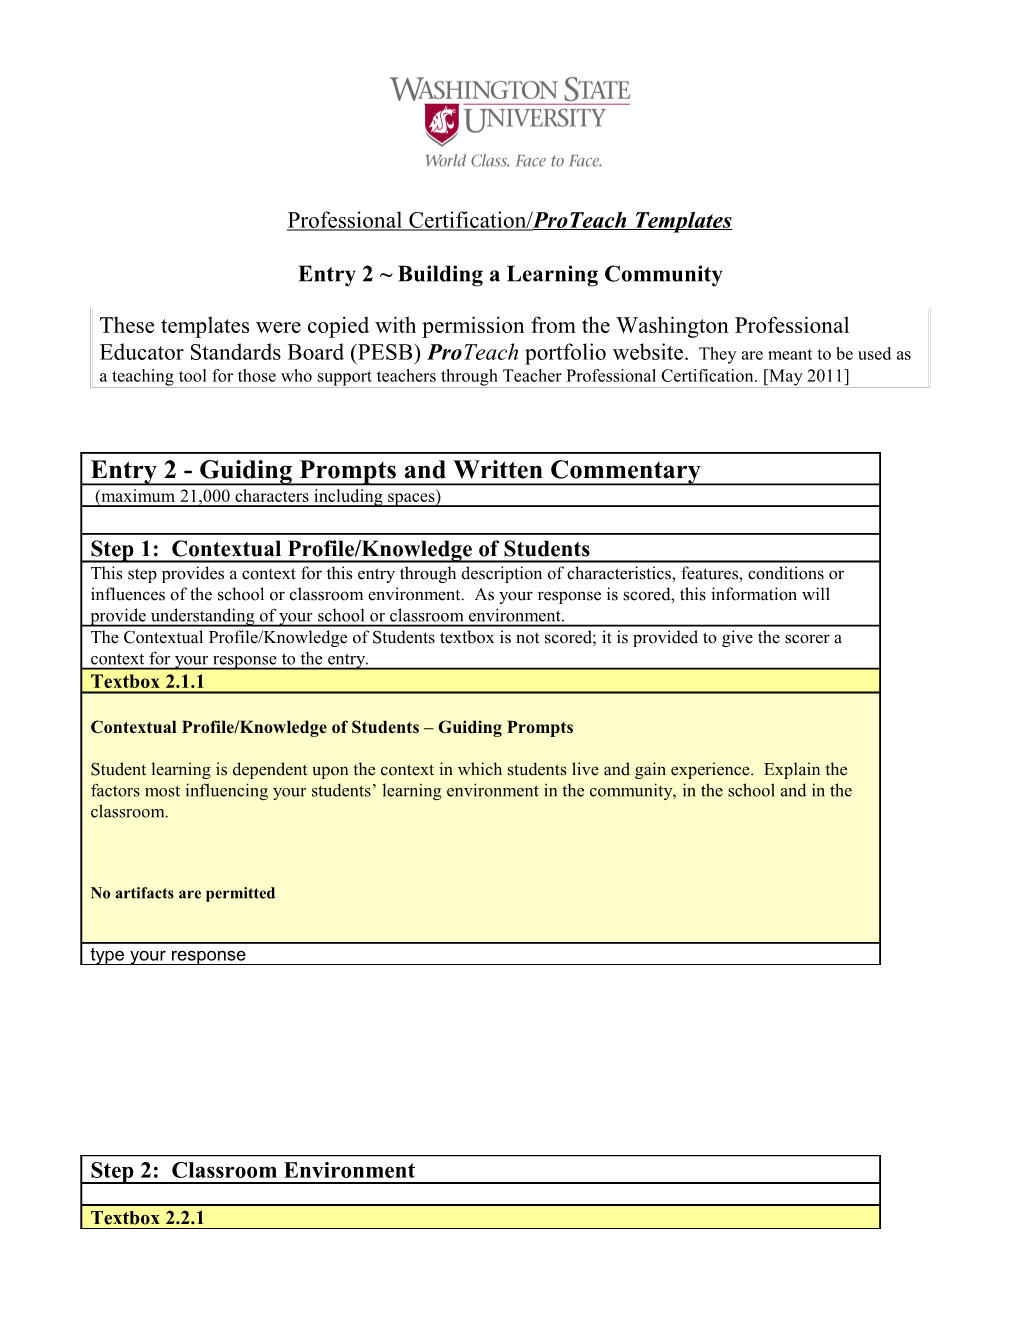 Professional Certification/ Proteach Templates